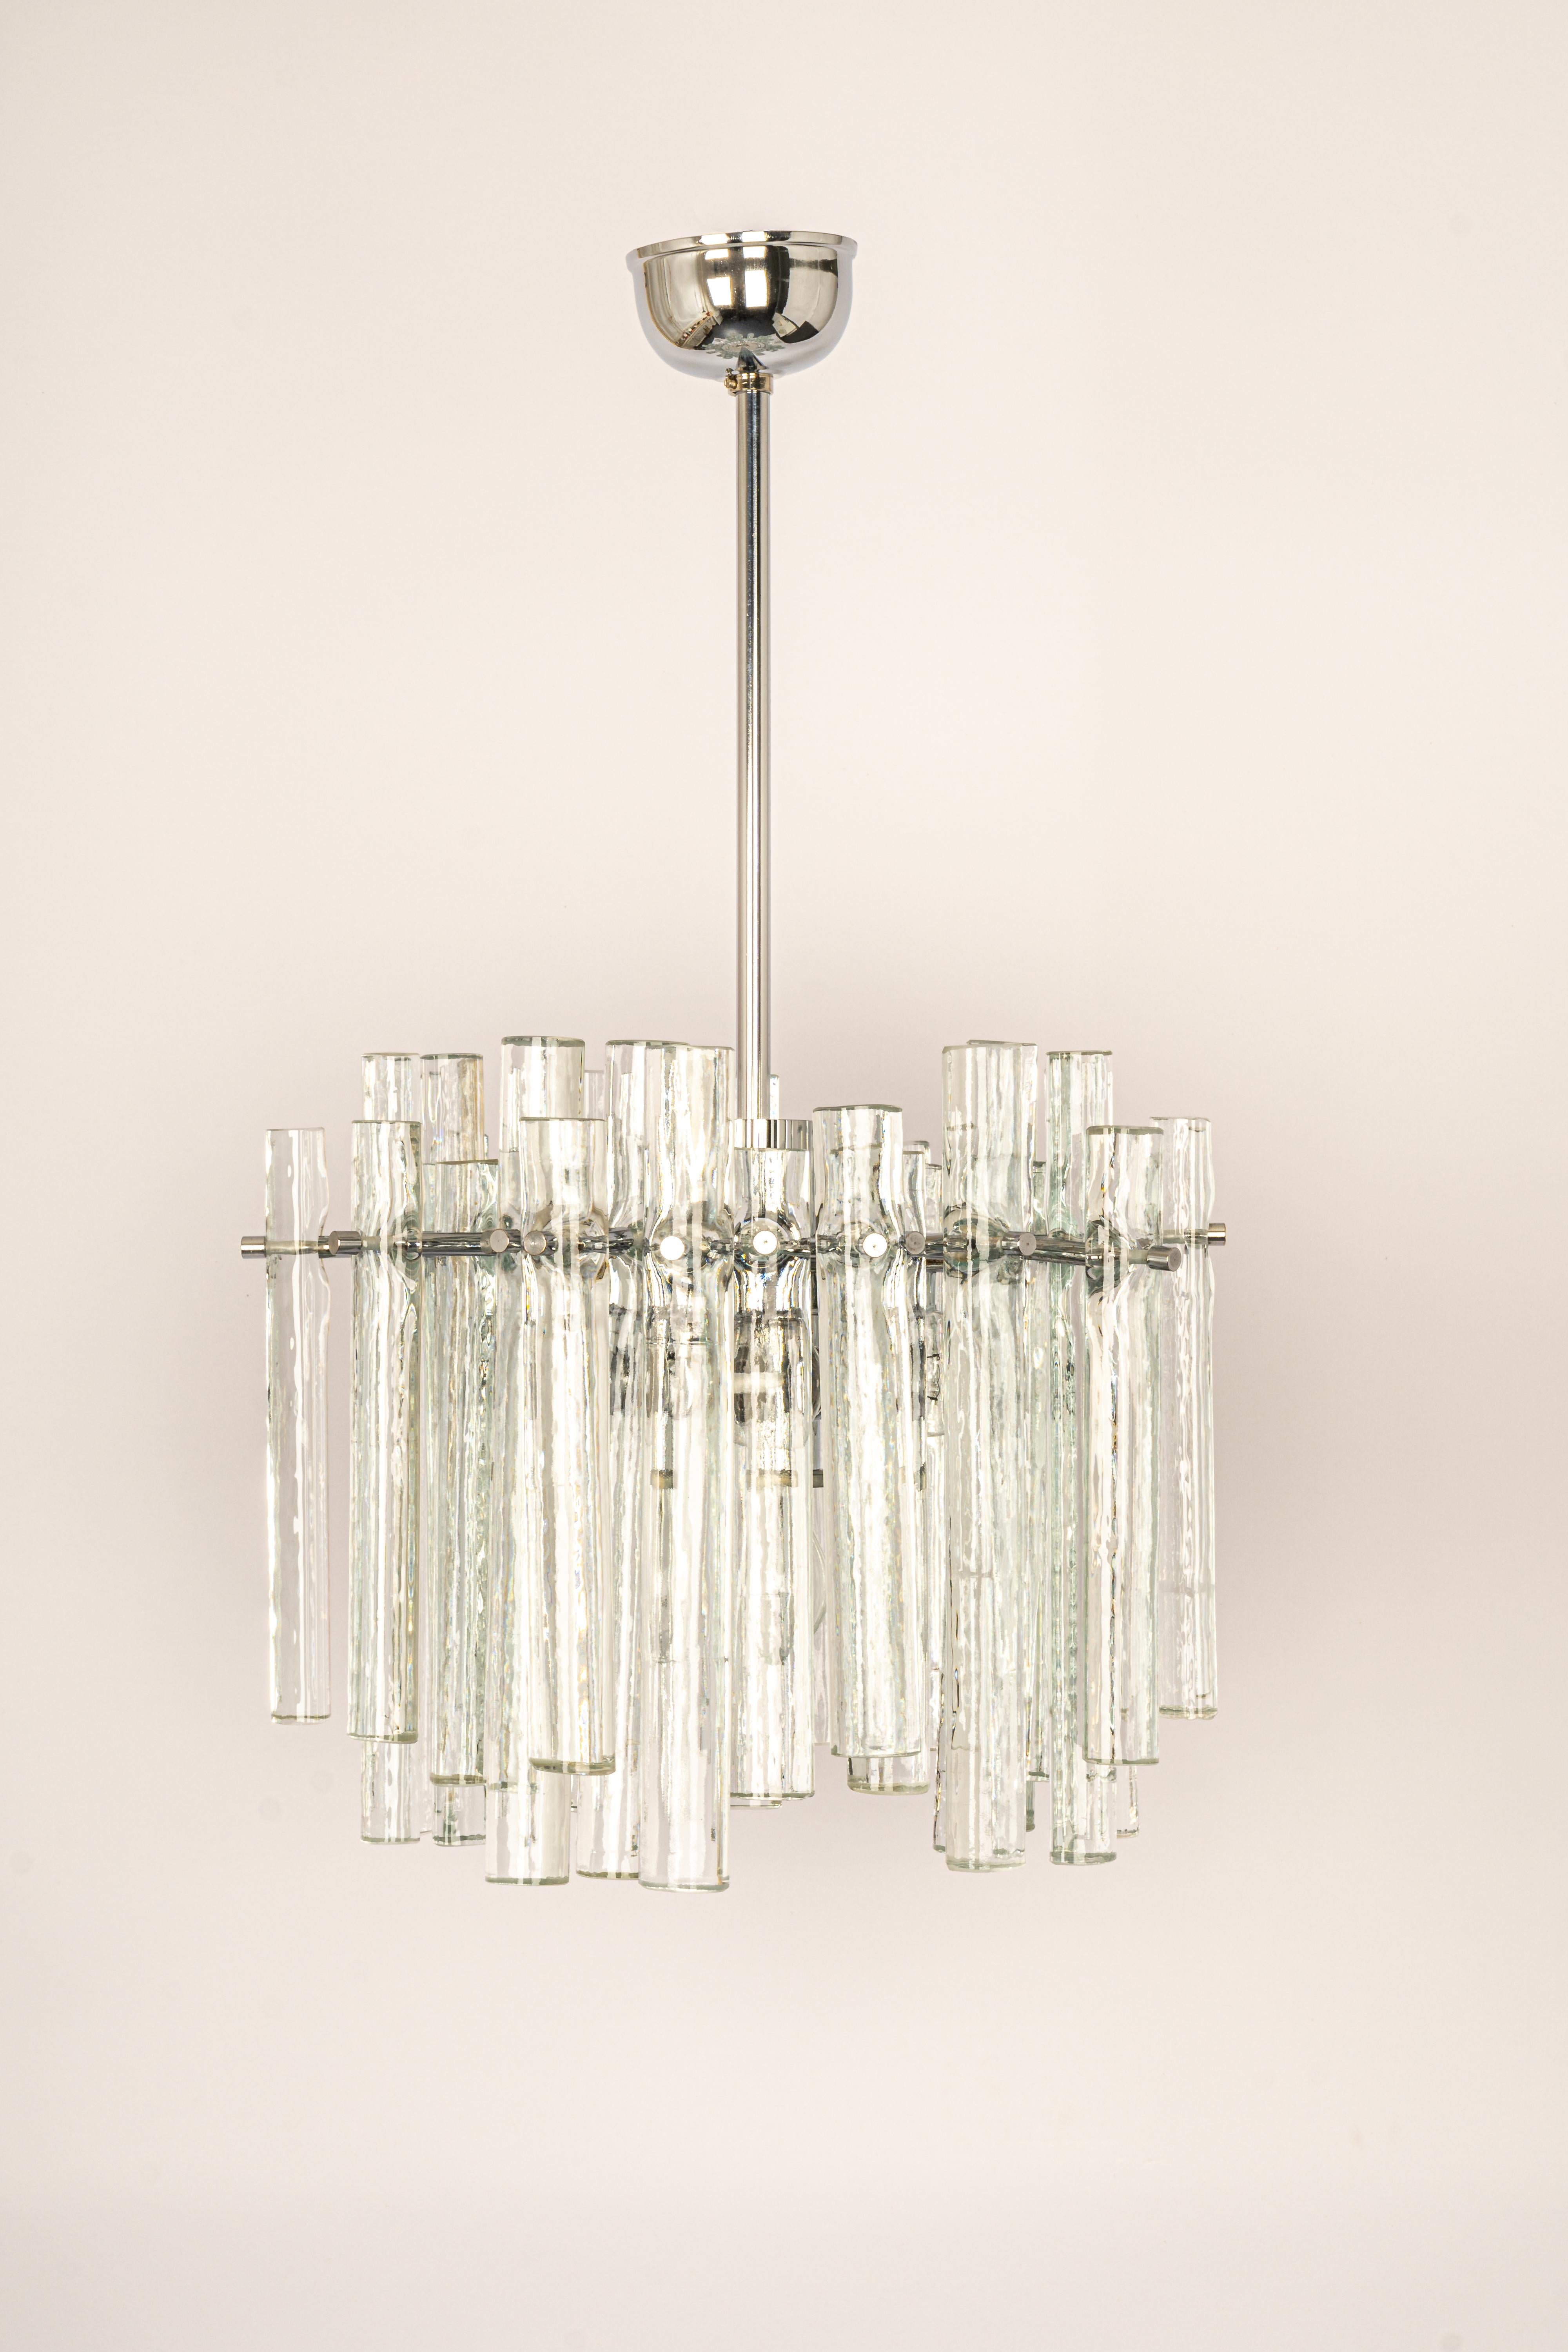 A stunning chandelier by Kinkeldey, Germany, manufactured in circa 1970-1979. A handmade and high-quality piece. The ceiling fixture and the frame are made of Chrome and a ring with lots of facetted crystal glass elements.
Modell: Cascade
Sockets: